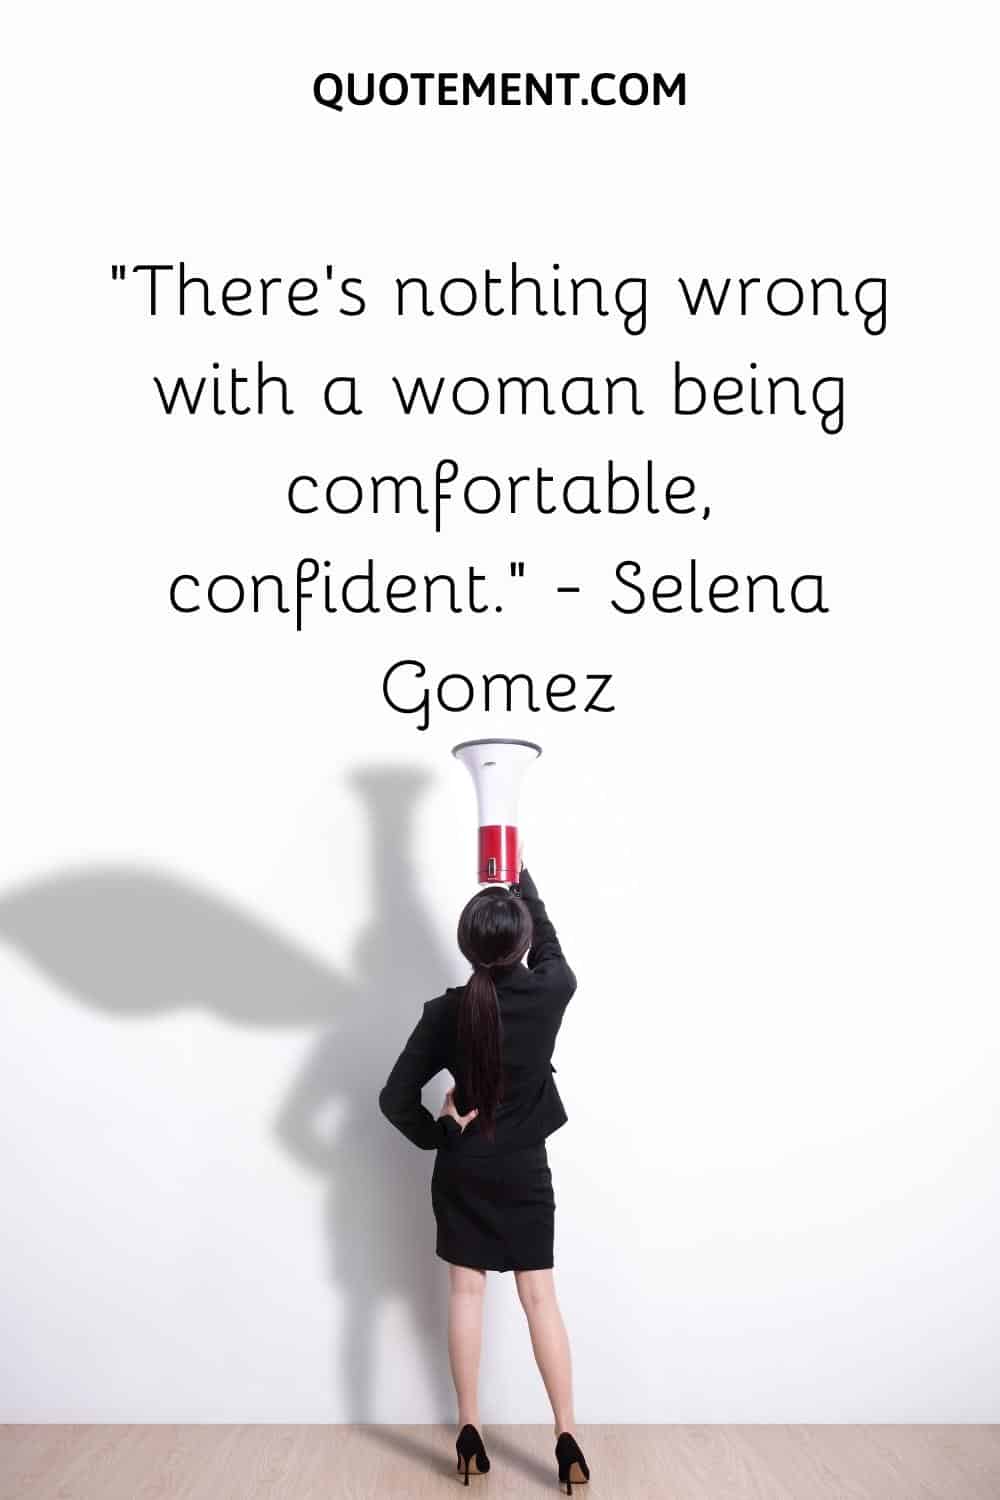 There’s nothing wrong with a woman being comfortable, confident